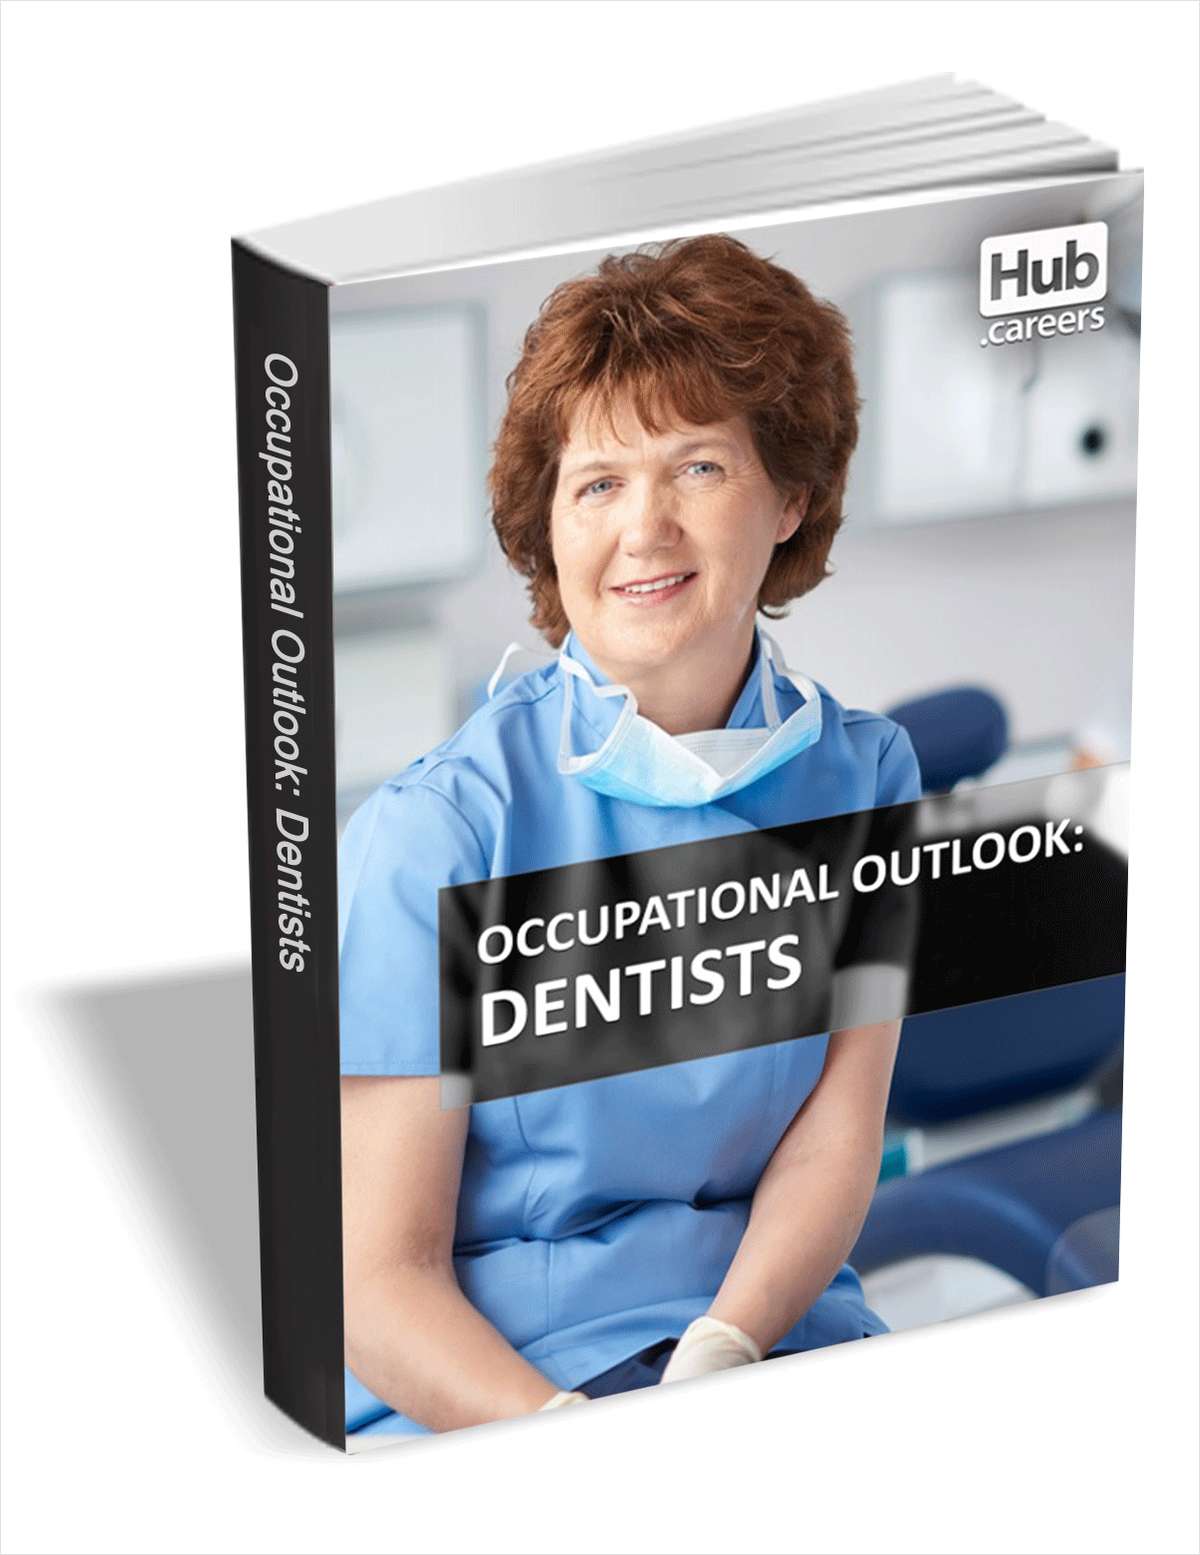 Dentists - Occupational Outlook